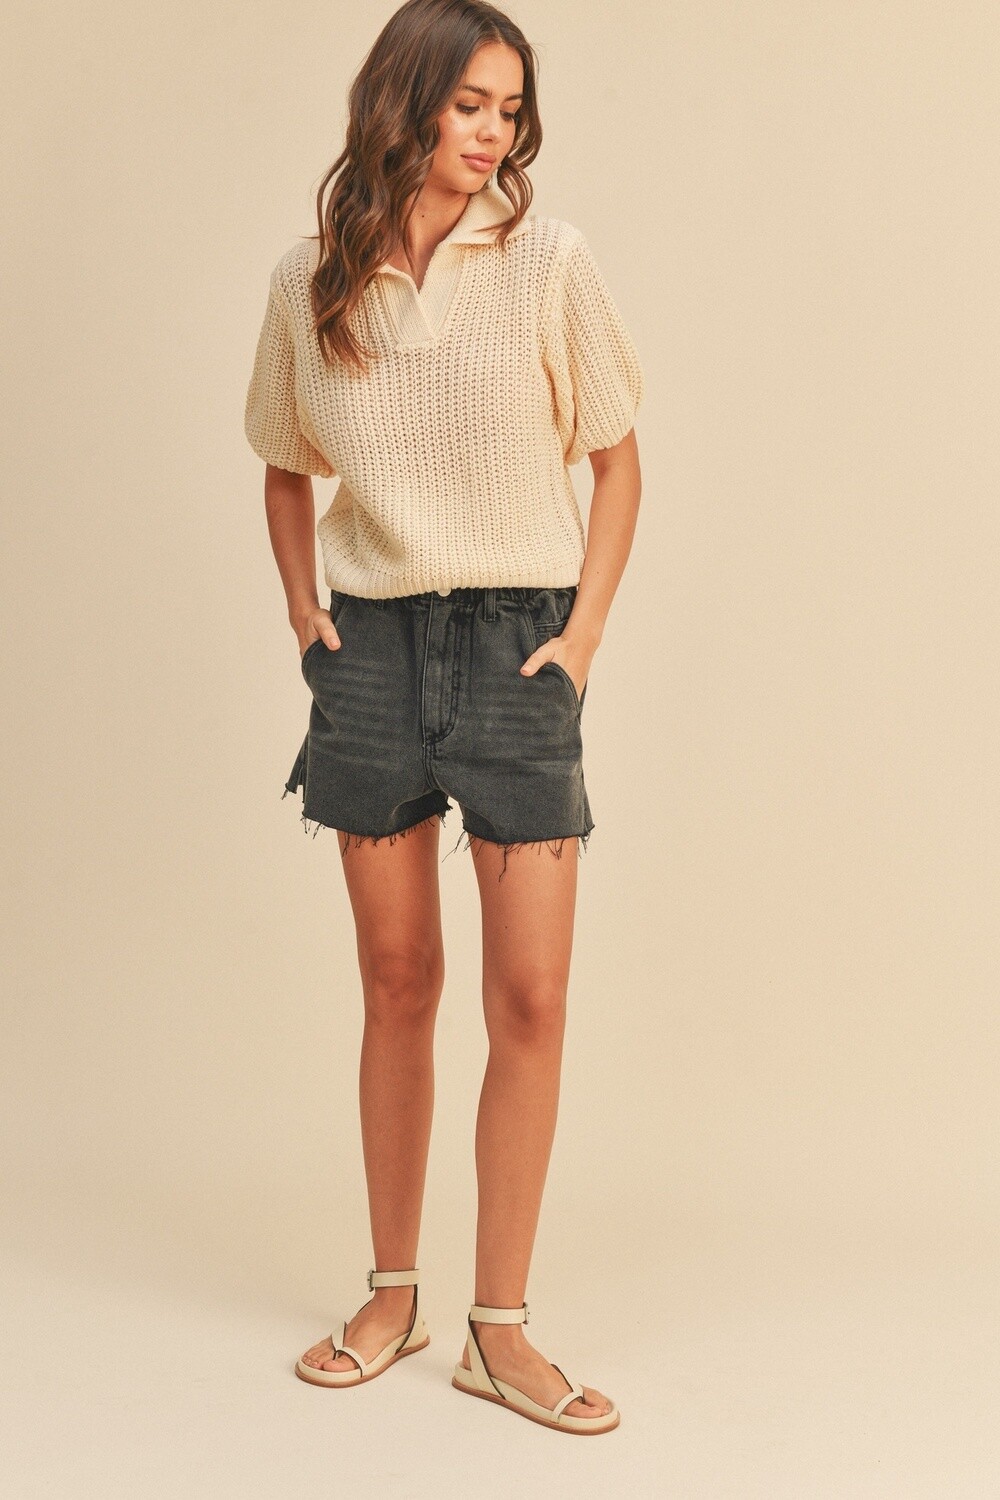 Collared Short Sleeve Knit Sweater in Beige